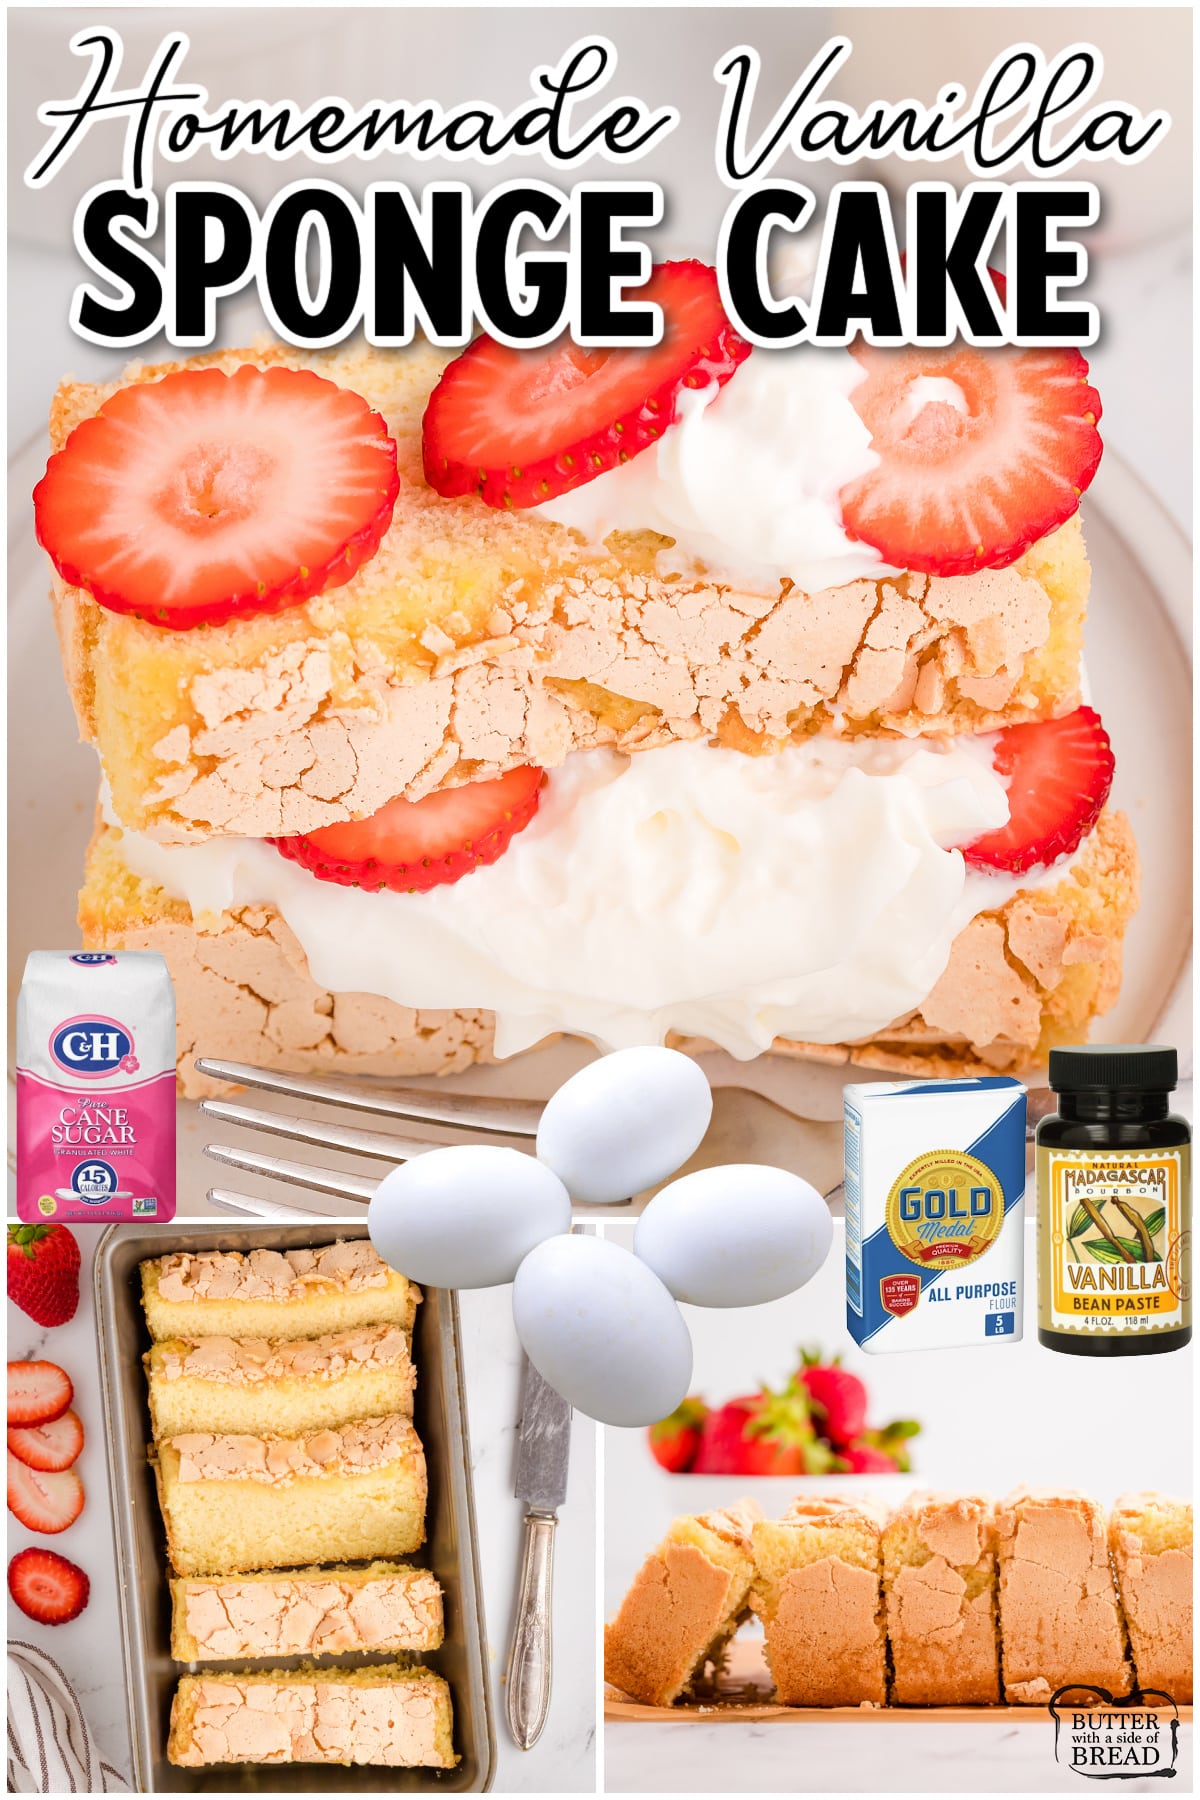 Easy Vanilla Sponge Cake made with just 4 ingredients & tastes incredible topped with strawberries & cream! It's perfect for any occasion & quickly comes together!